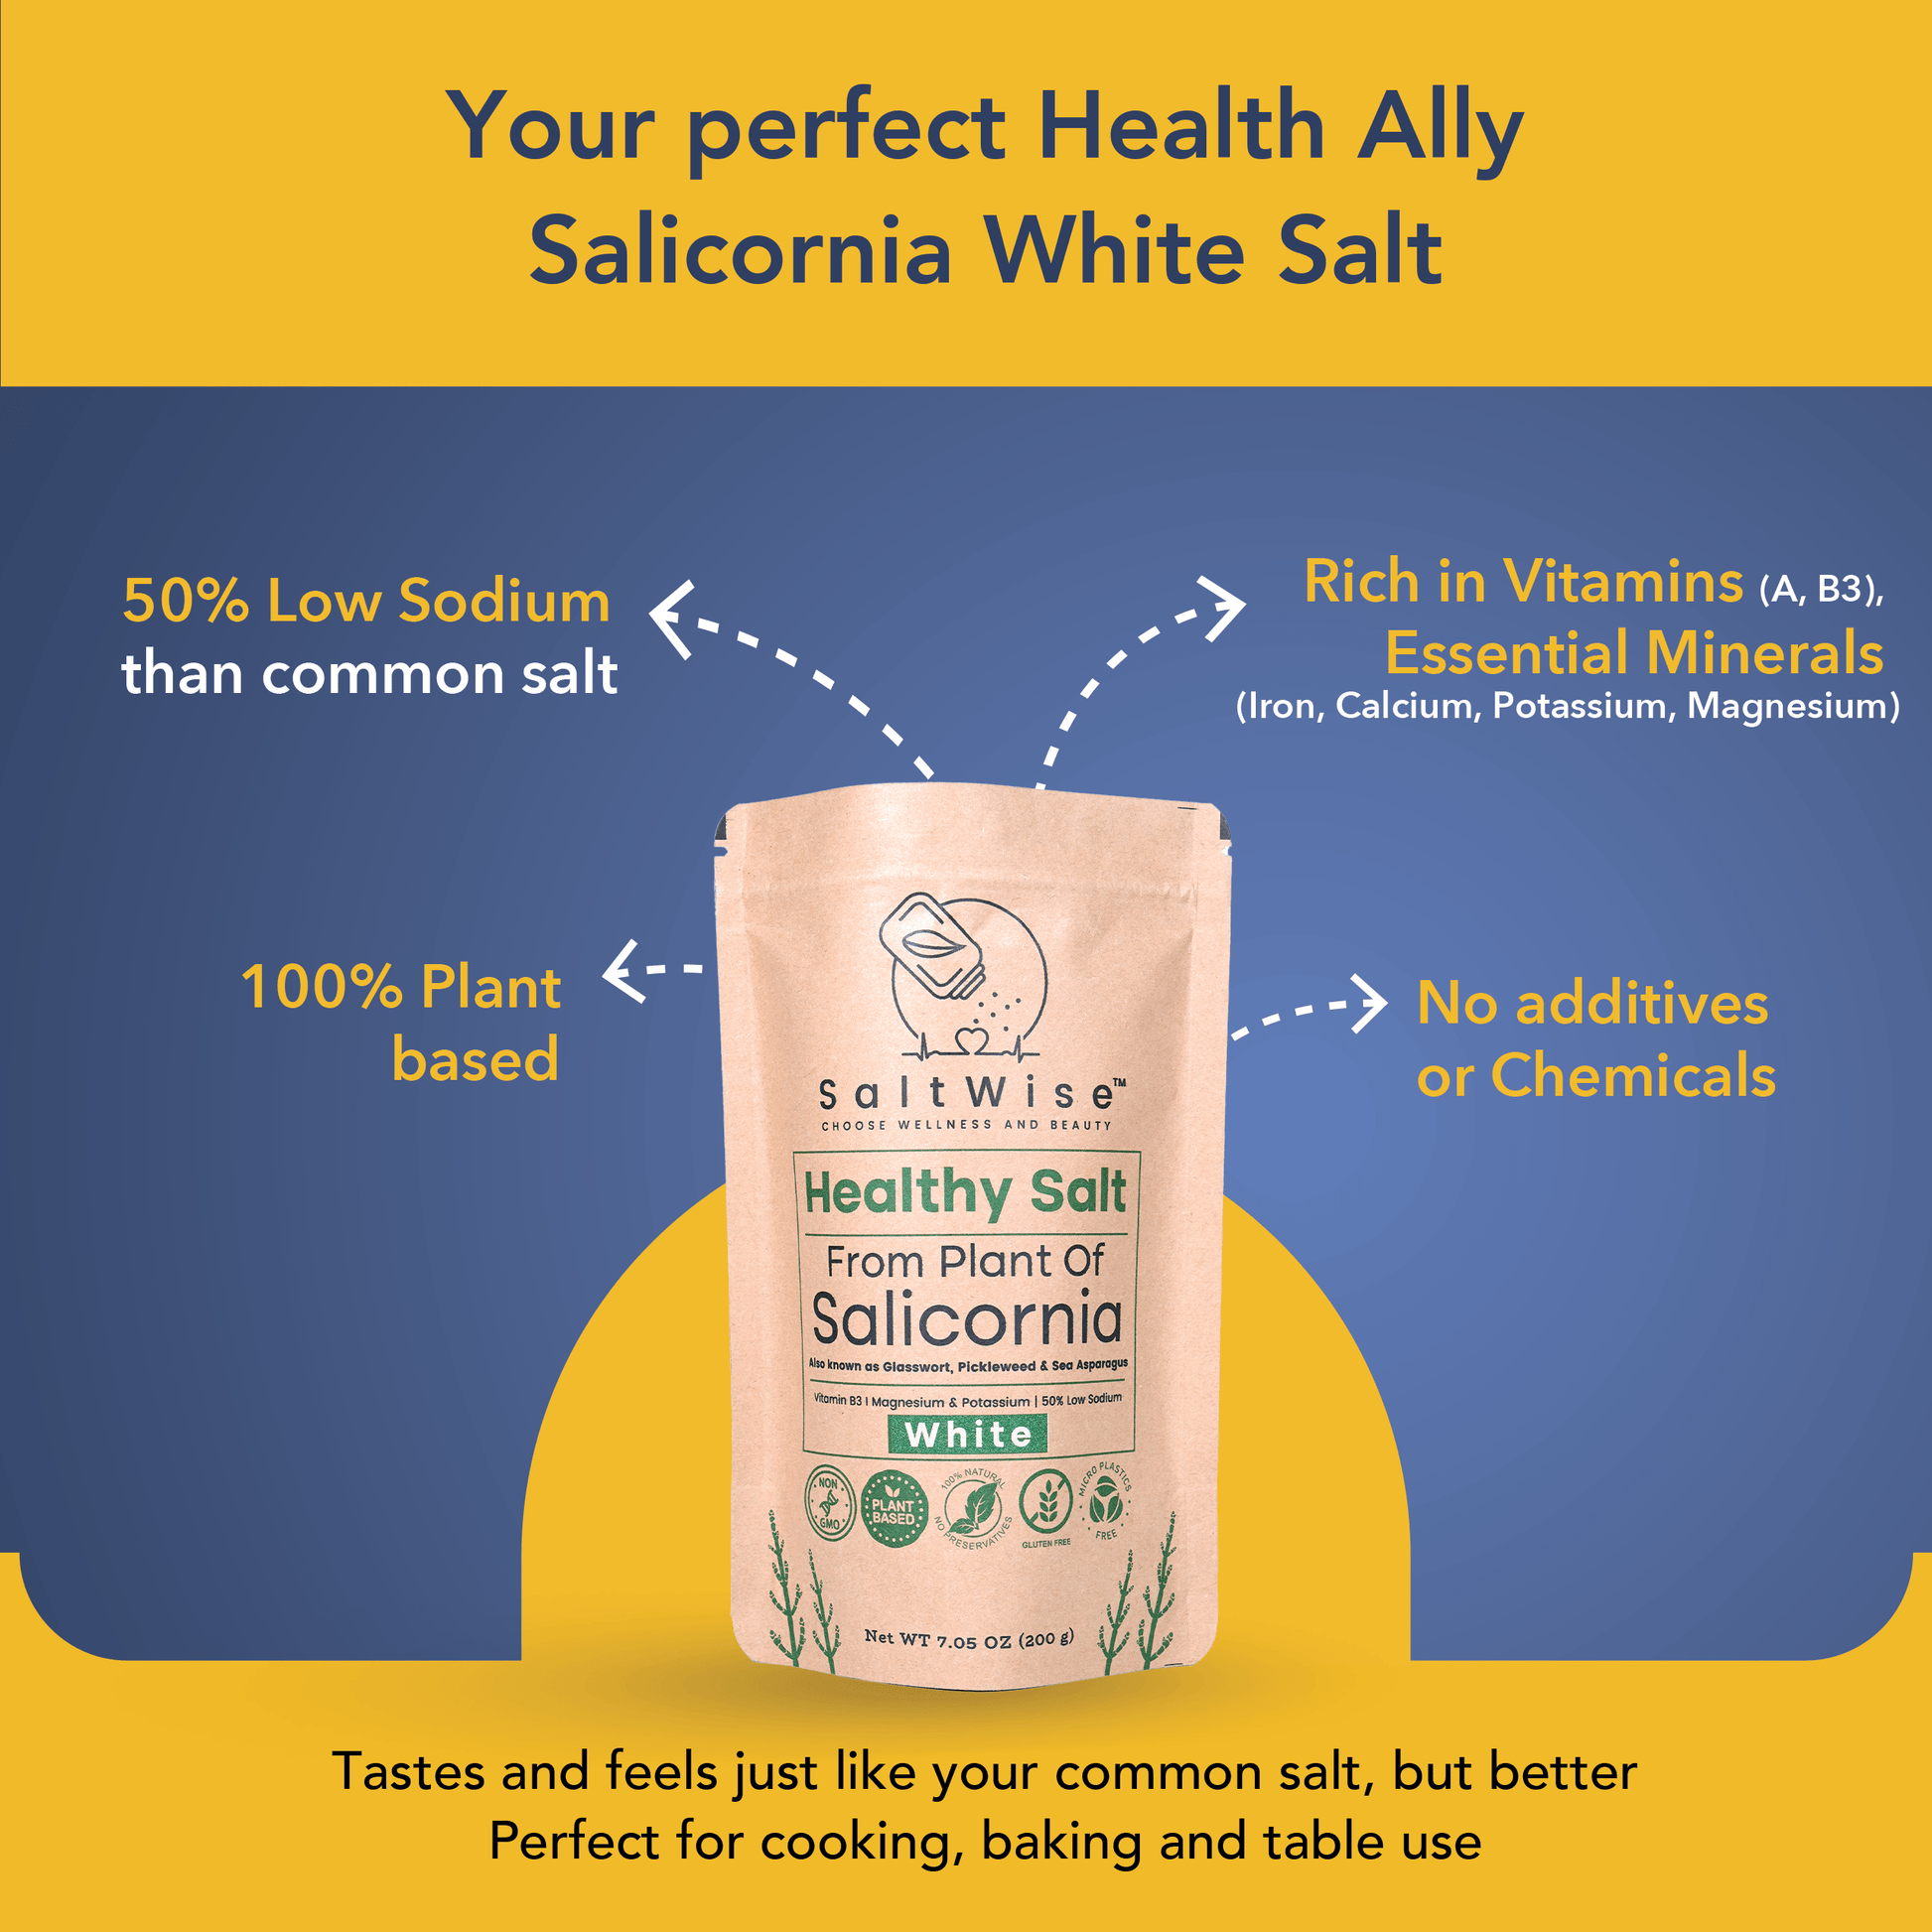 Naturally loaded with nutrients like Vitamin A, B3, Iron, Calcium, Magnesium, Potassium and with 50% less Sodium, Salicornia White Salt is your perfect health ally. Chemical free, Additive Free, and Gluten free Salt is perfect for cooking, baking and table use.